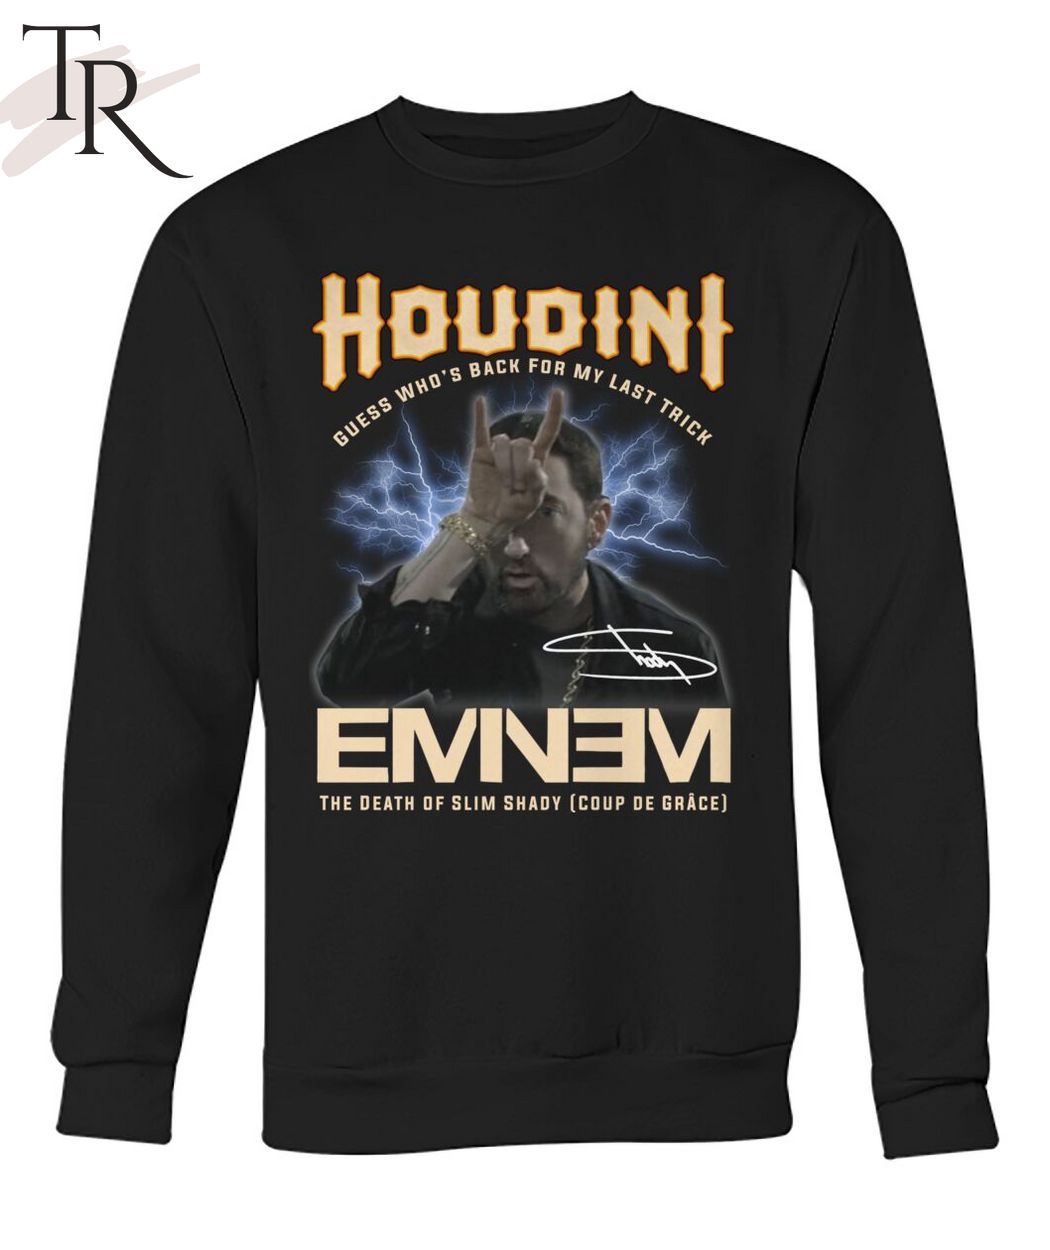 Houdini Guess Who's Back For My Last Trick Eminem The Death Of Slim Shady T-Shirt